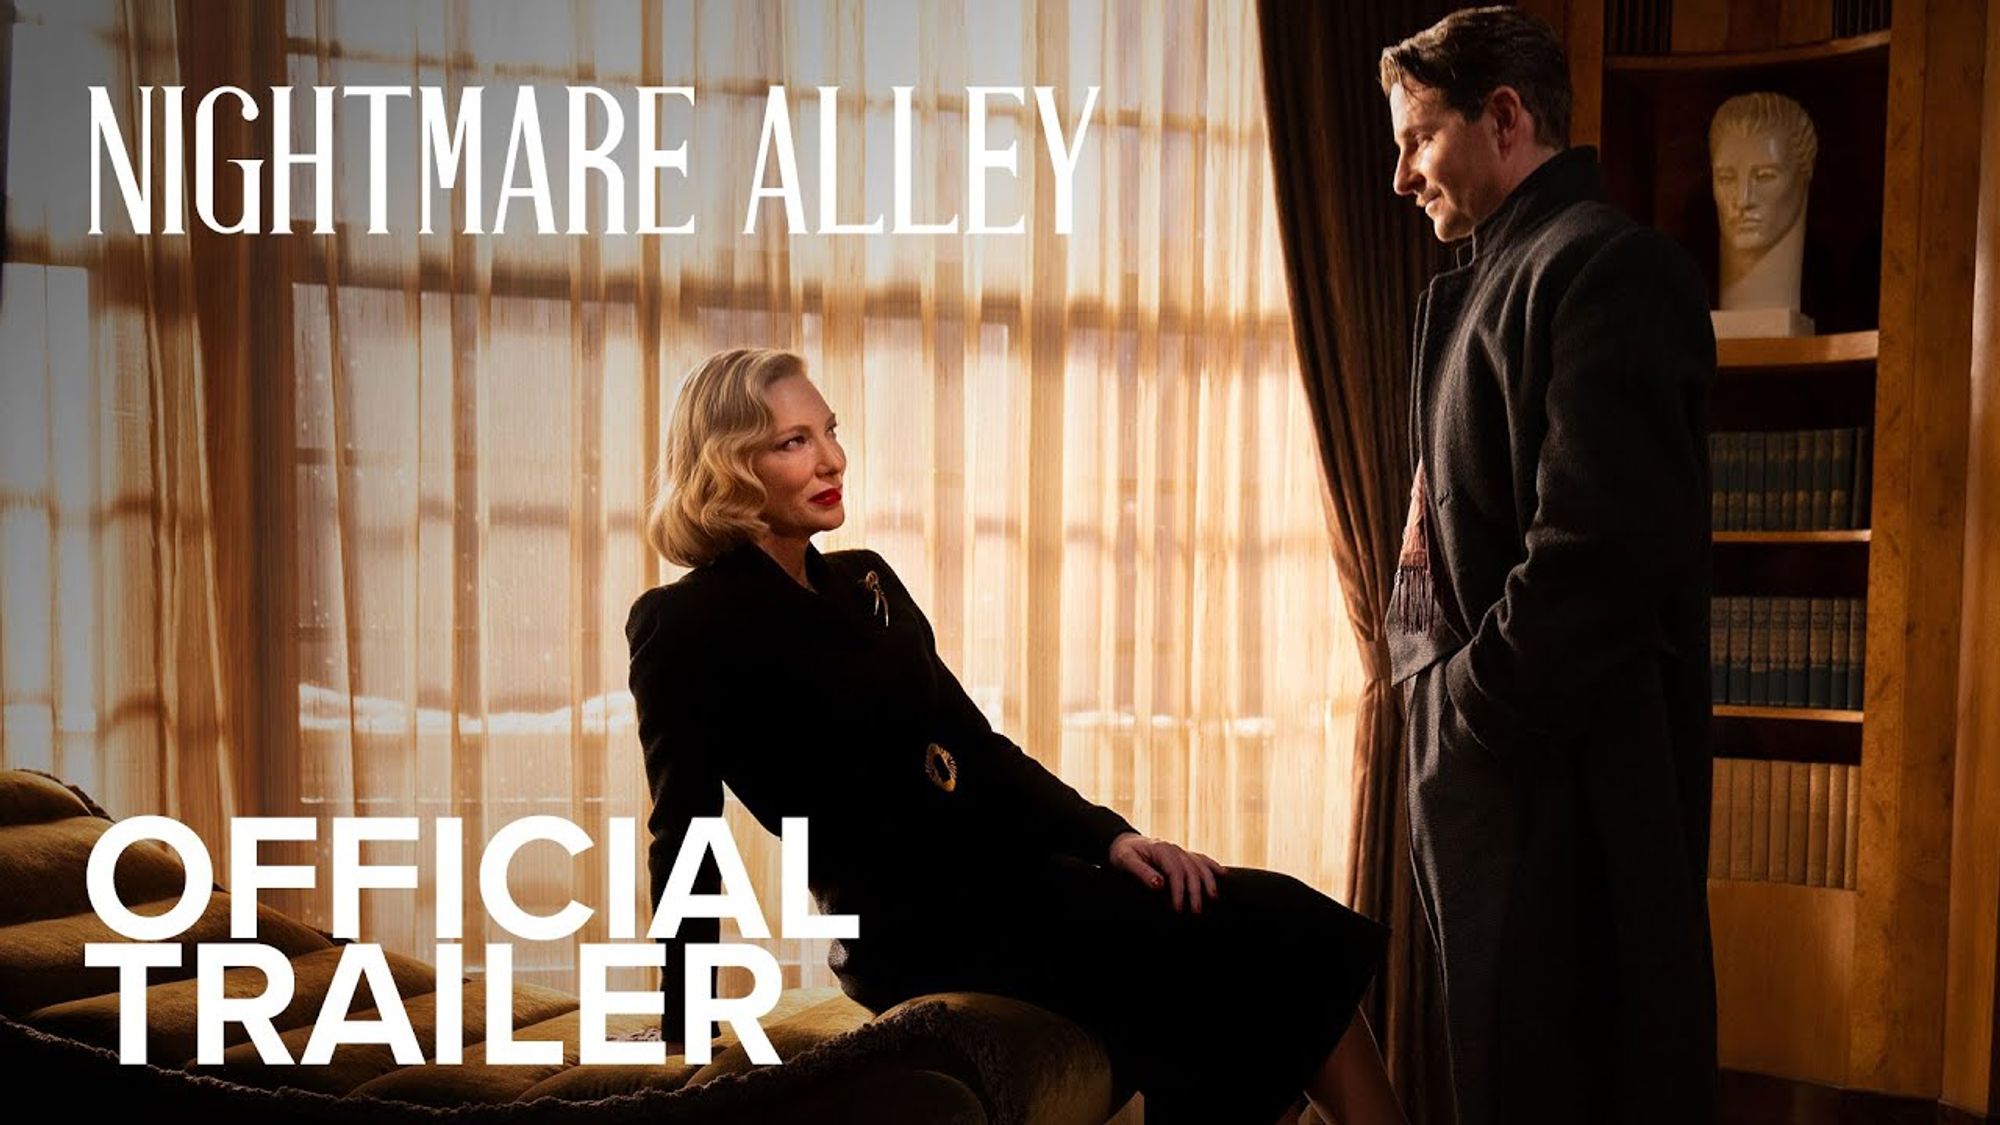 Cate Blanchett joins Nightmare Alley with Bradley Cooper